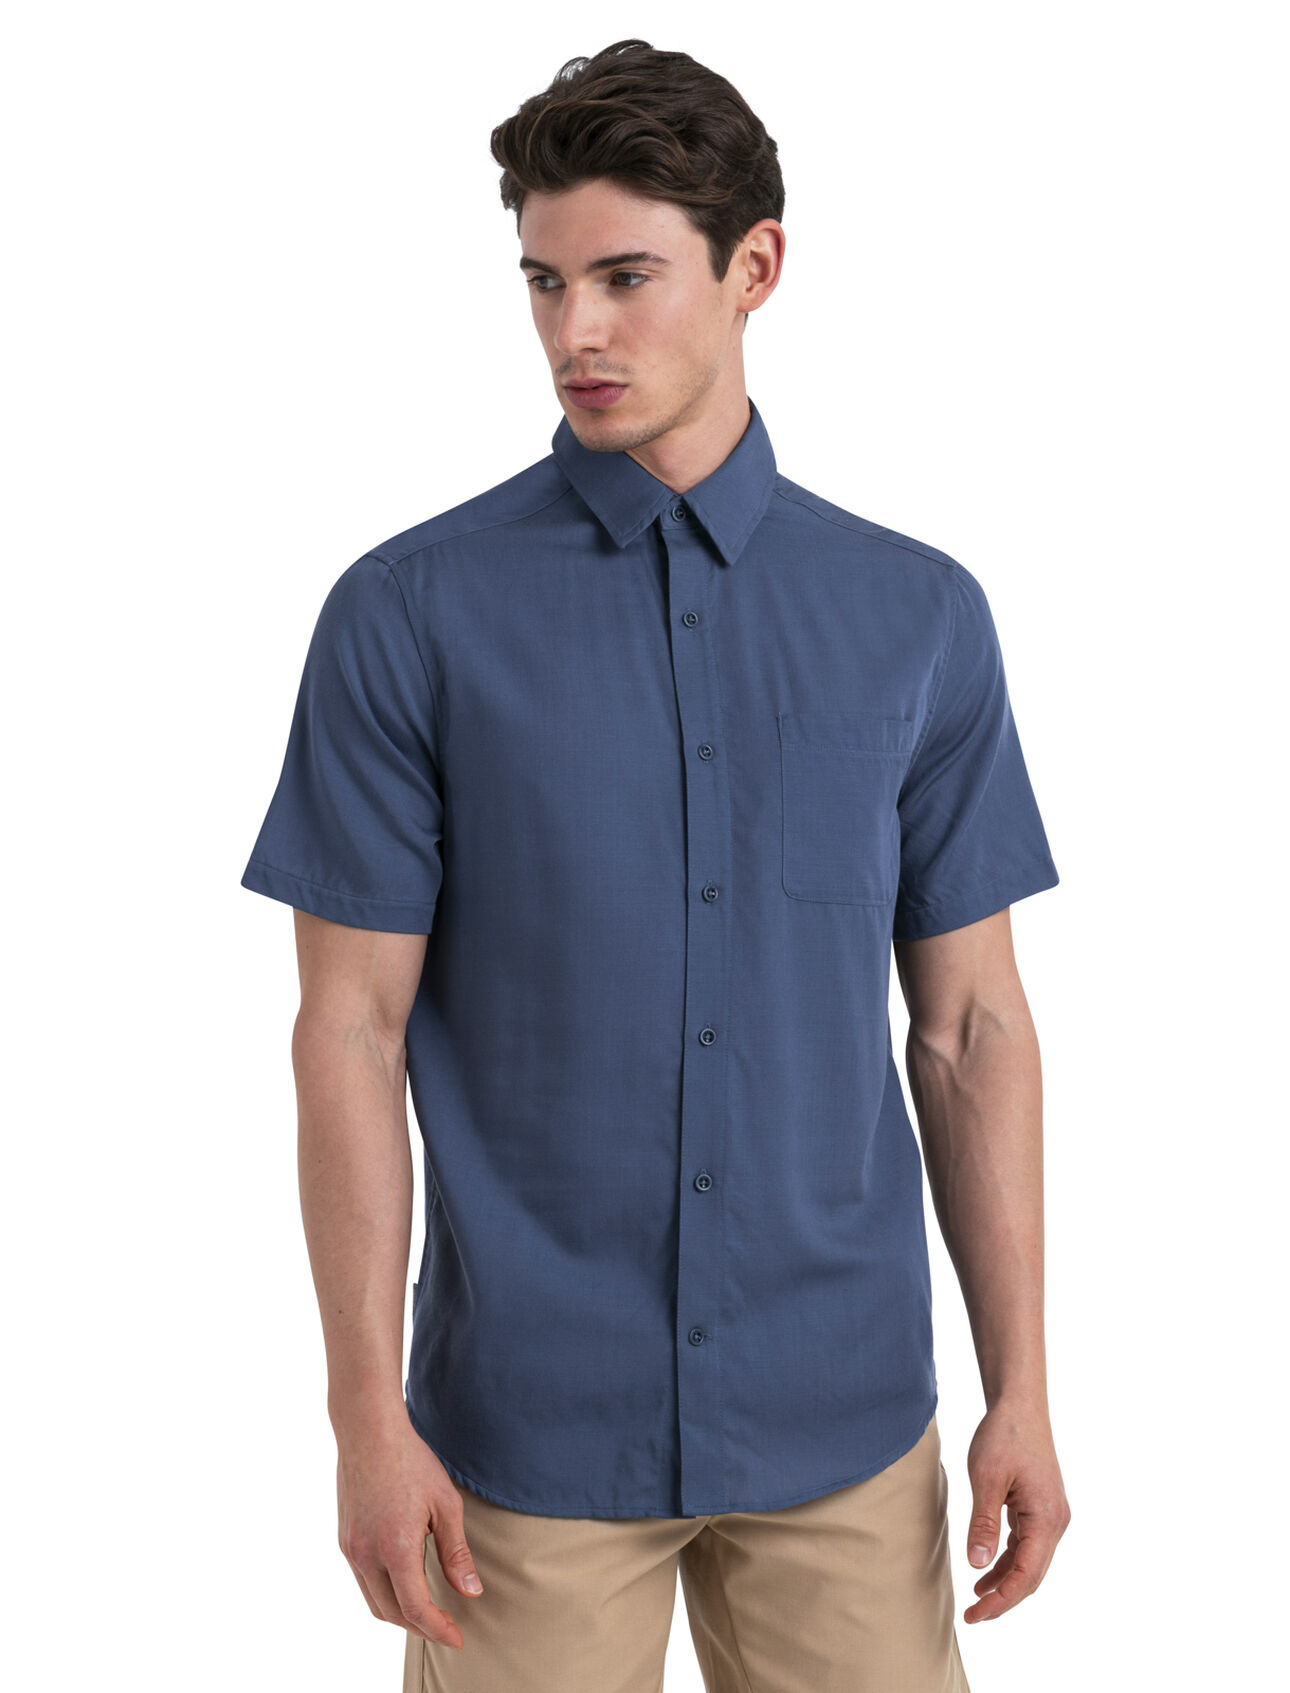 Mens Merino Steveston Short Sleeve Shirt A classic lightweight woven shirt featuring our breathable Cool-Lite™ woven merino blend, the Steveston Short Sleeve Shirt combines versatile style with natural comfort.